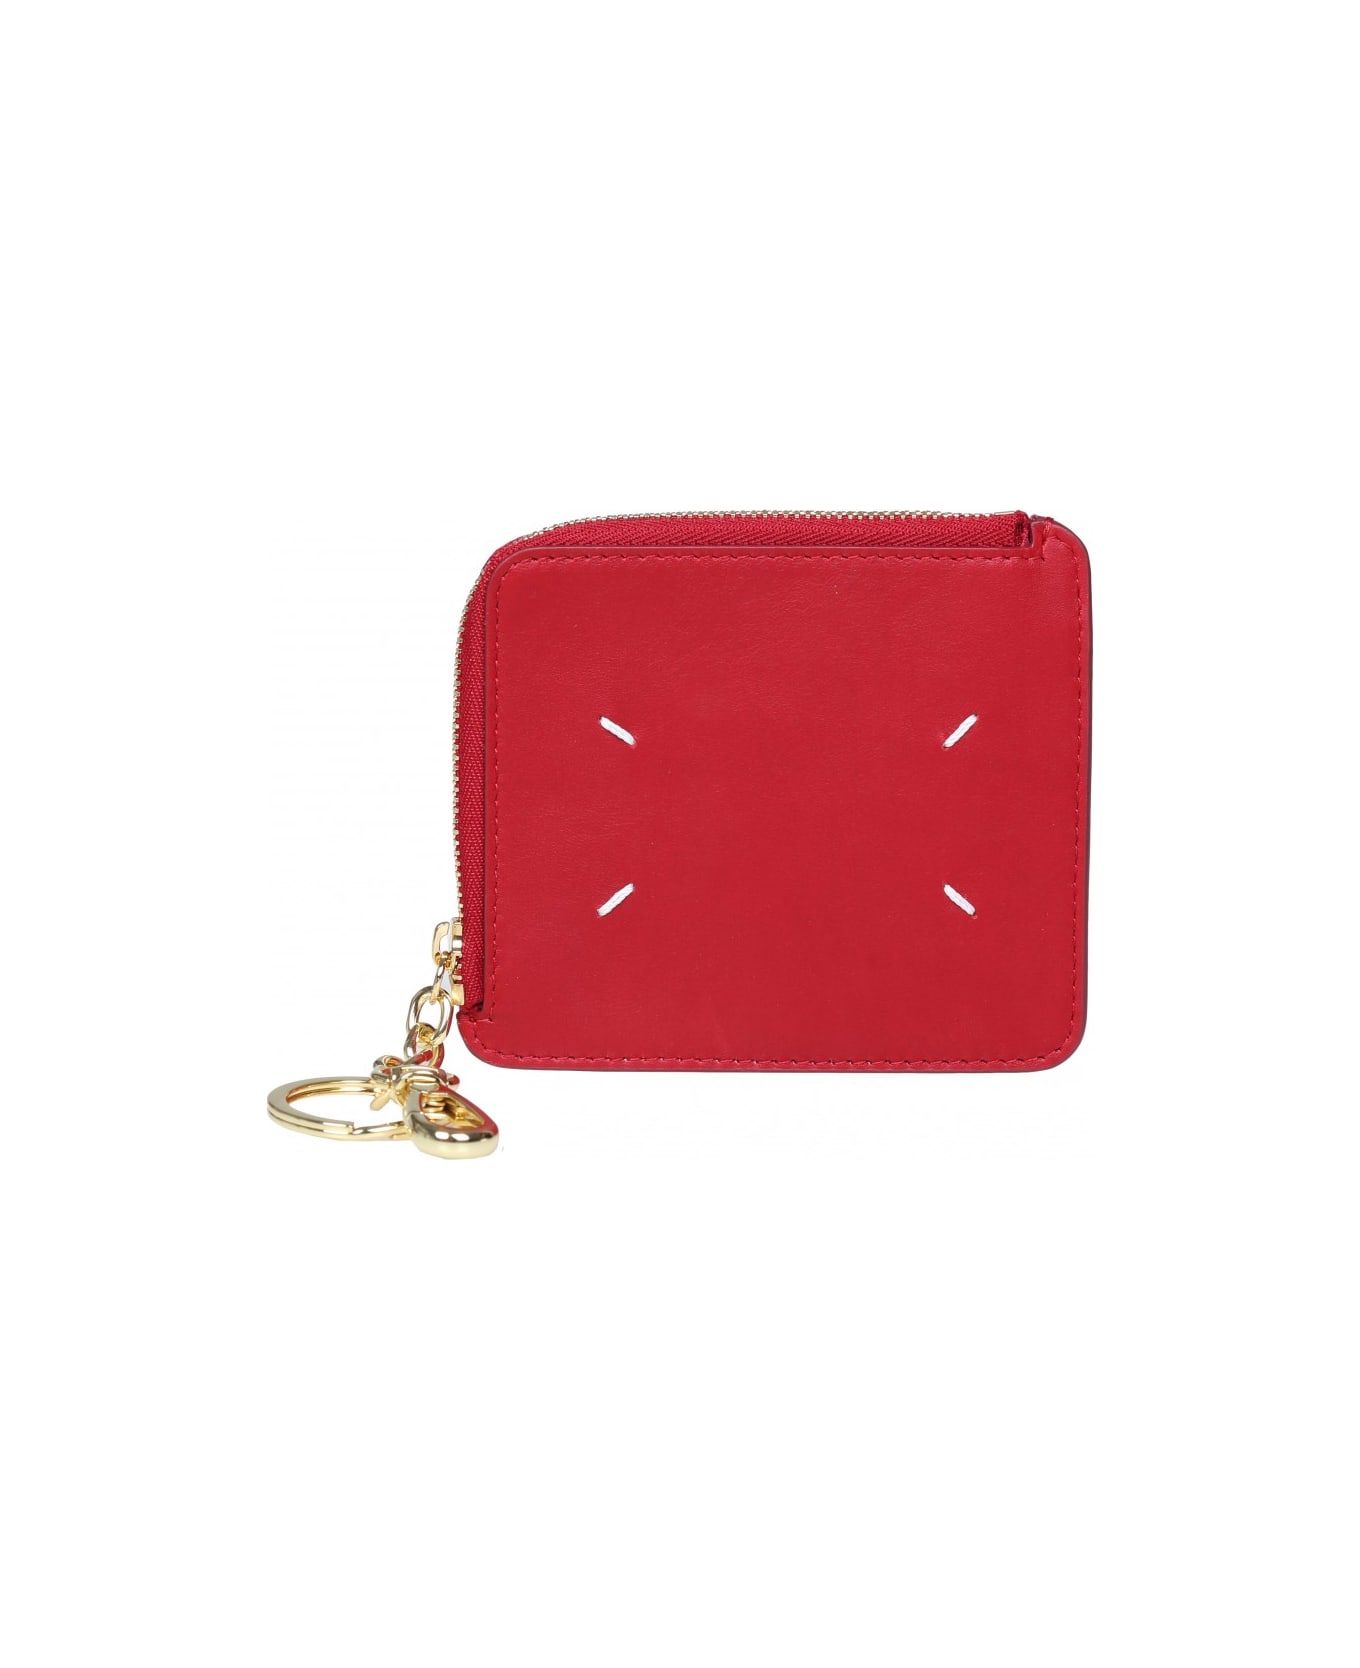 Maison Margiela Leather Key Chain Wallet Color Red - Red 財布